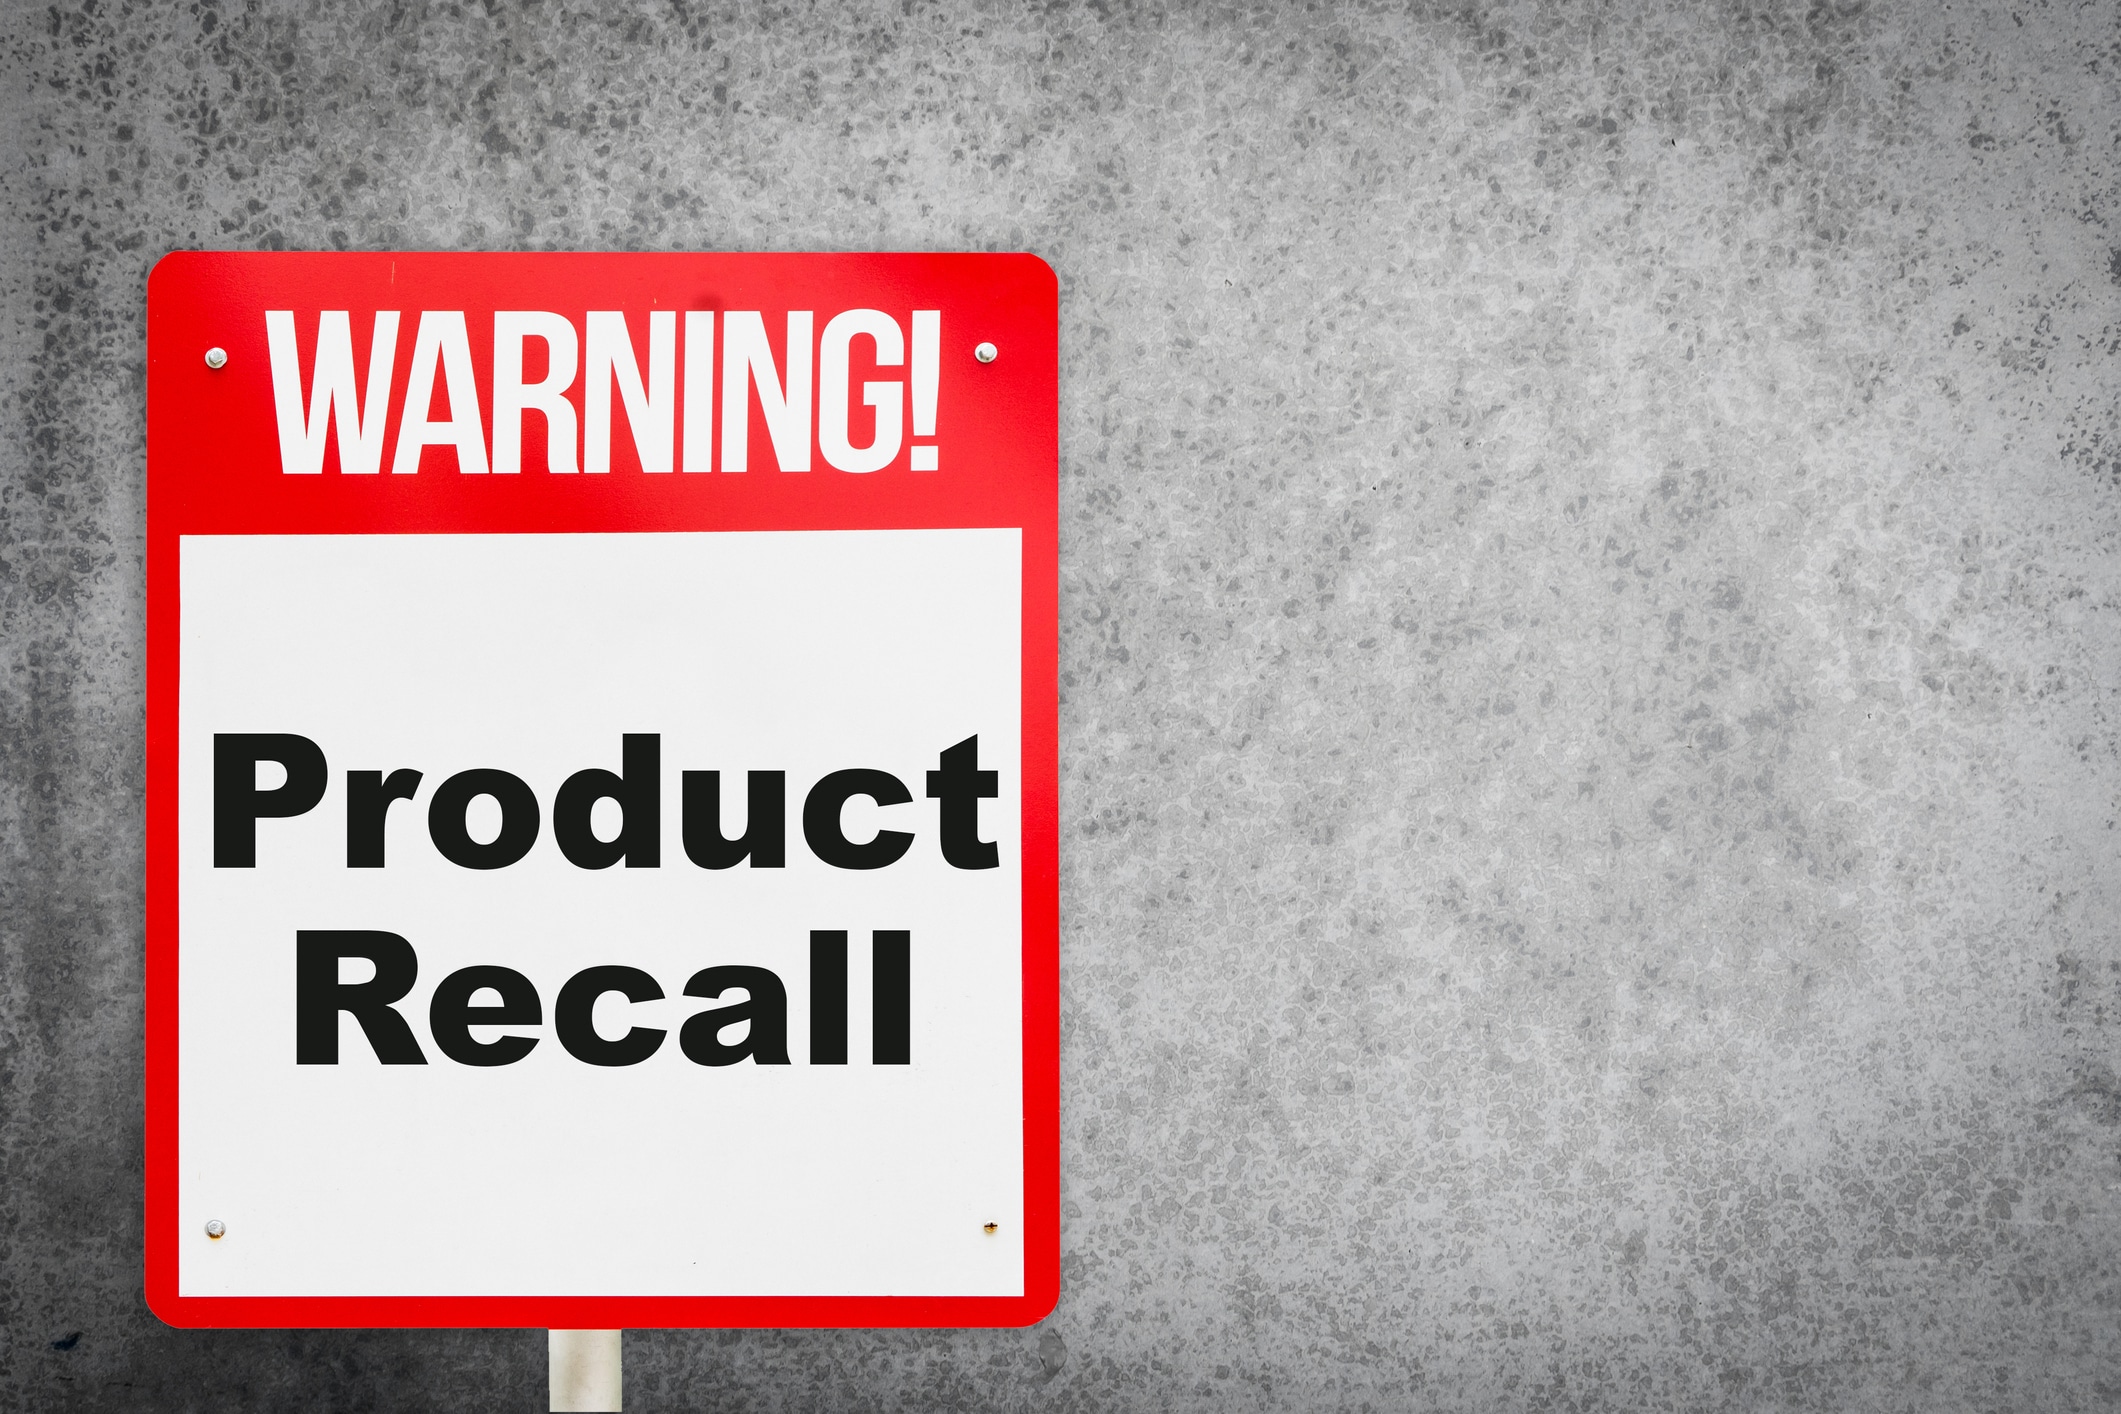 Learn The Common Fda Recall Terms And Definitions And How To Effectively Manage A Product Recall